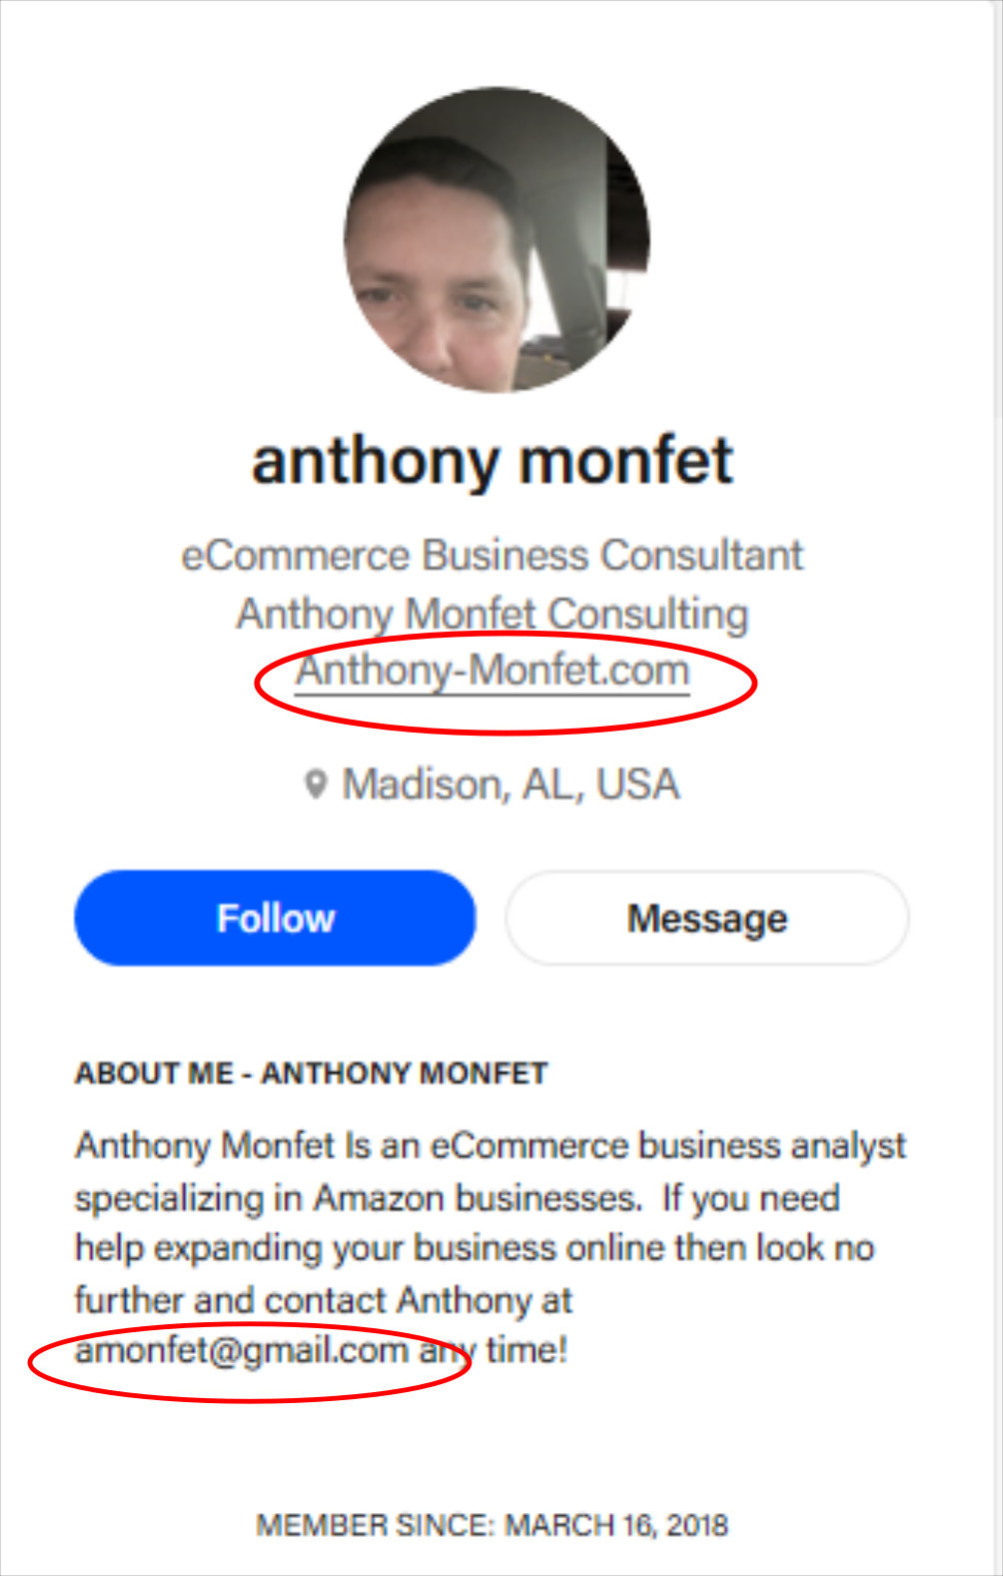 Anthony Monfet is presented as an eCommerce business consultant on behance.net